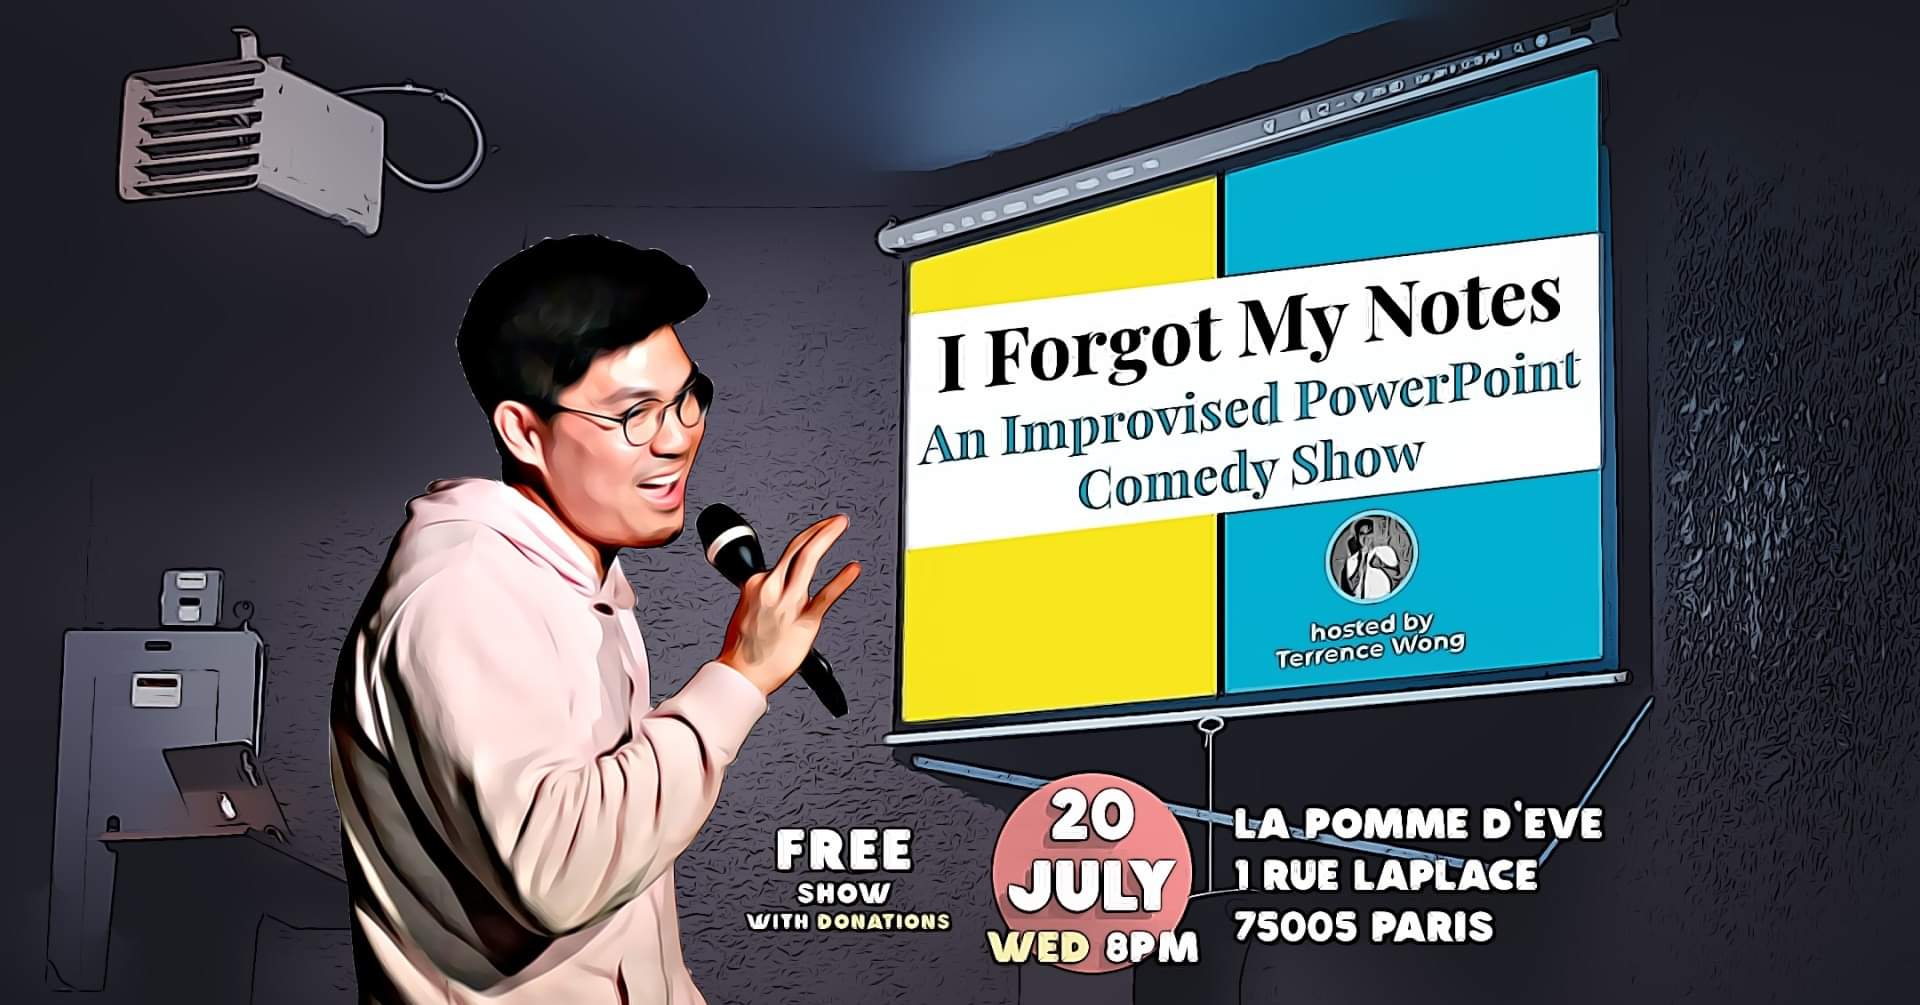 I Forgot My Notes - An Improvised PowerPoint Comedy Show 20.07